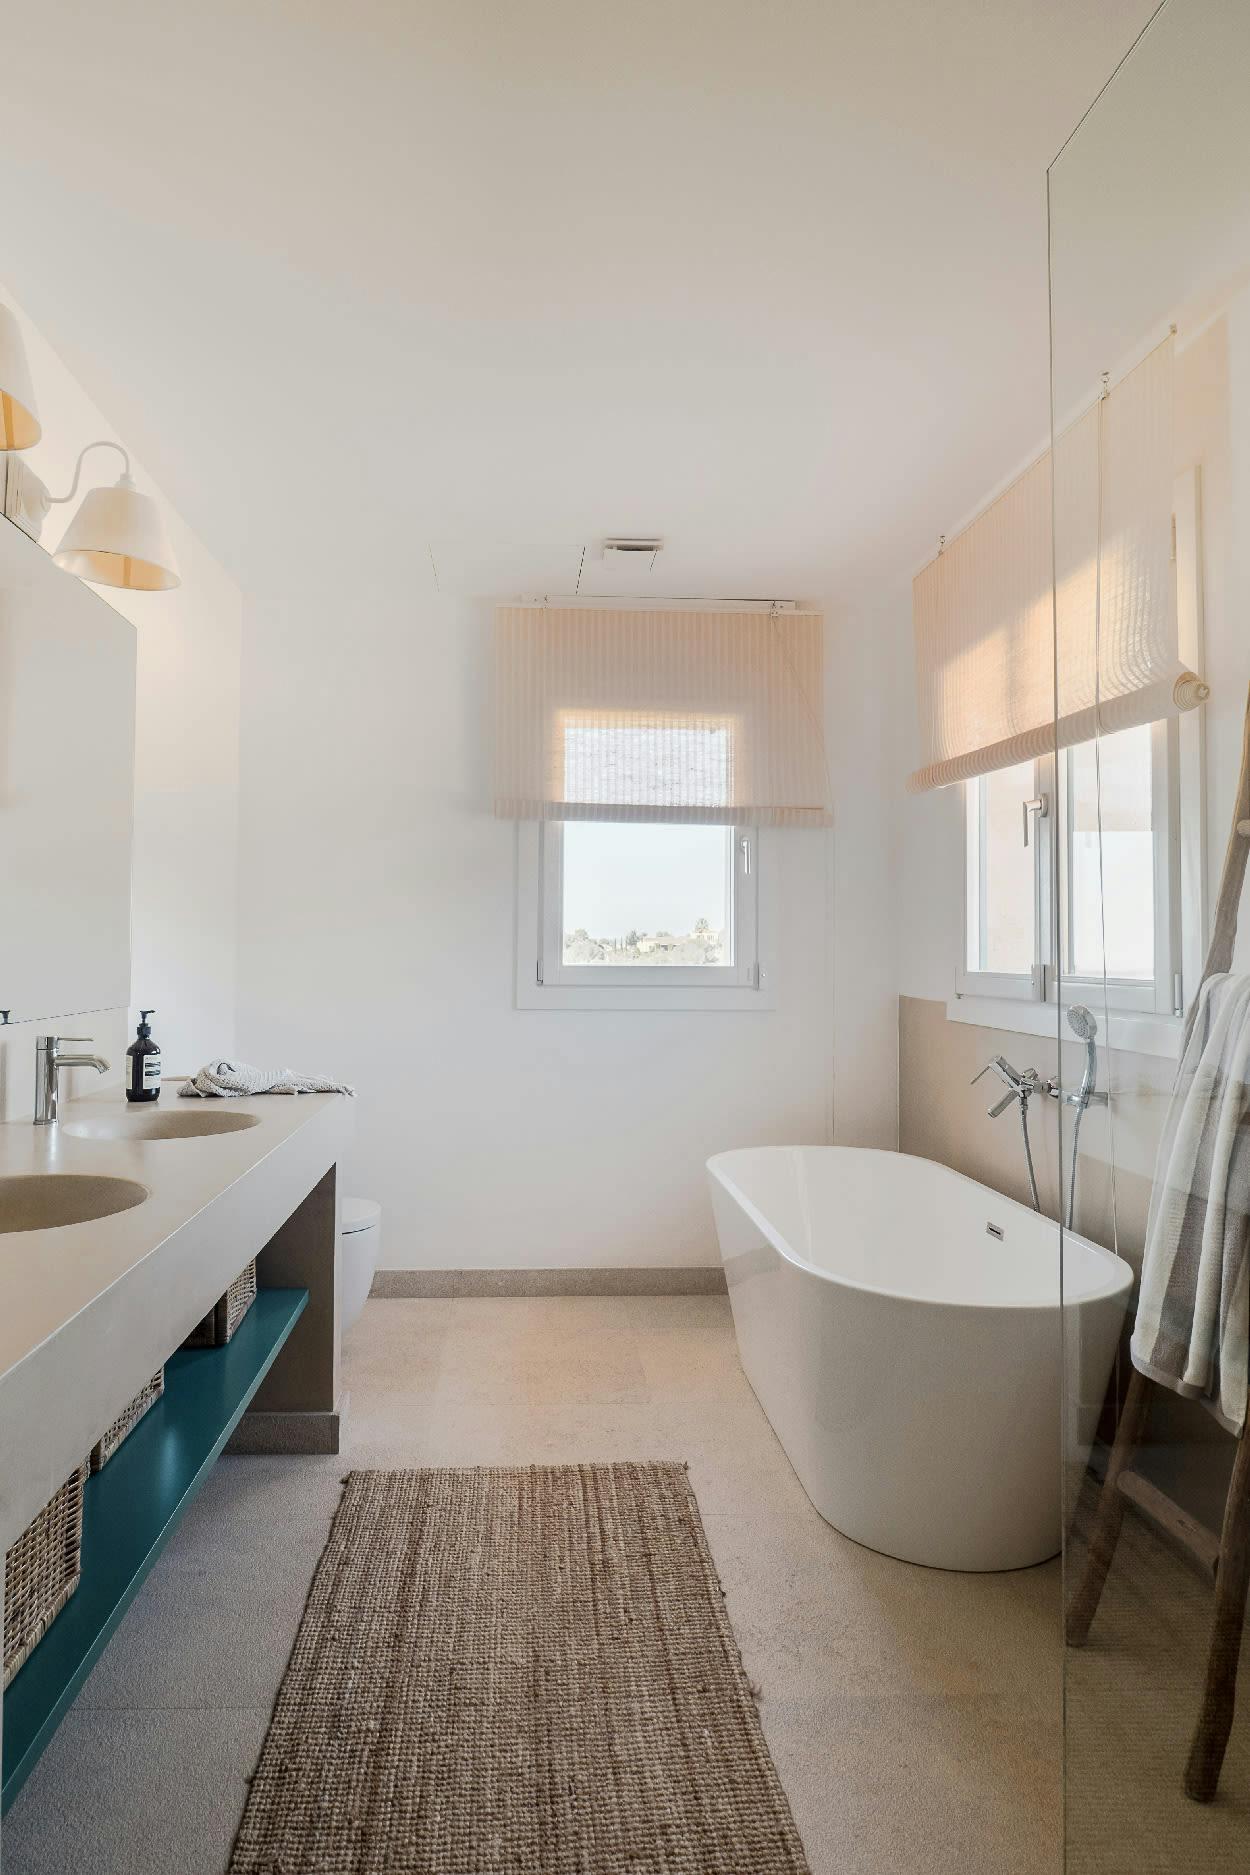 The image features a large, modern bathroom with a white bathtub, sink, and toilet. The bathroom is clean and well-lit, with a rug on the floor and a window nearby.